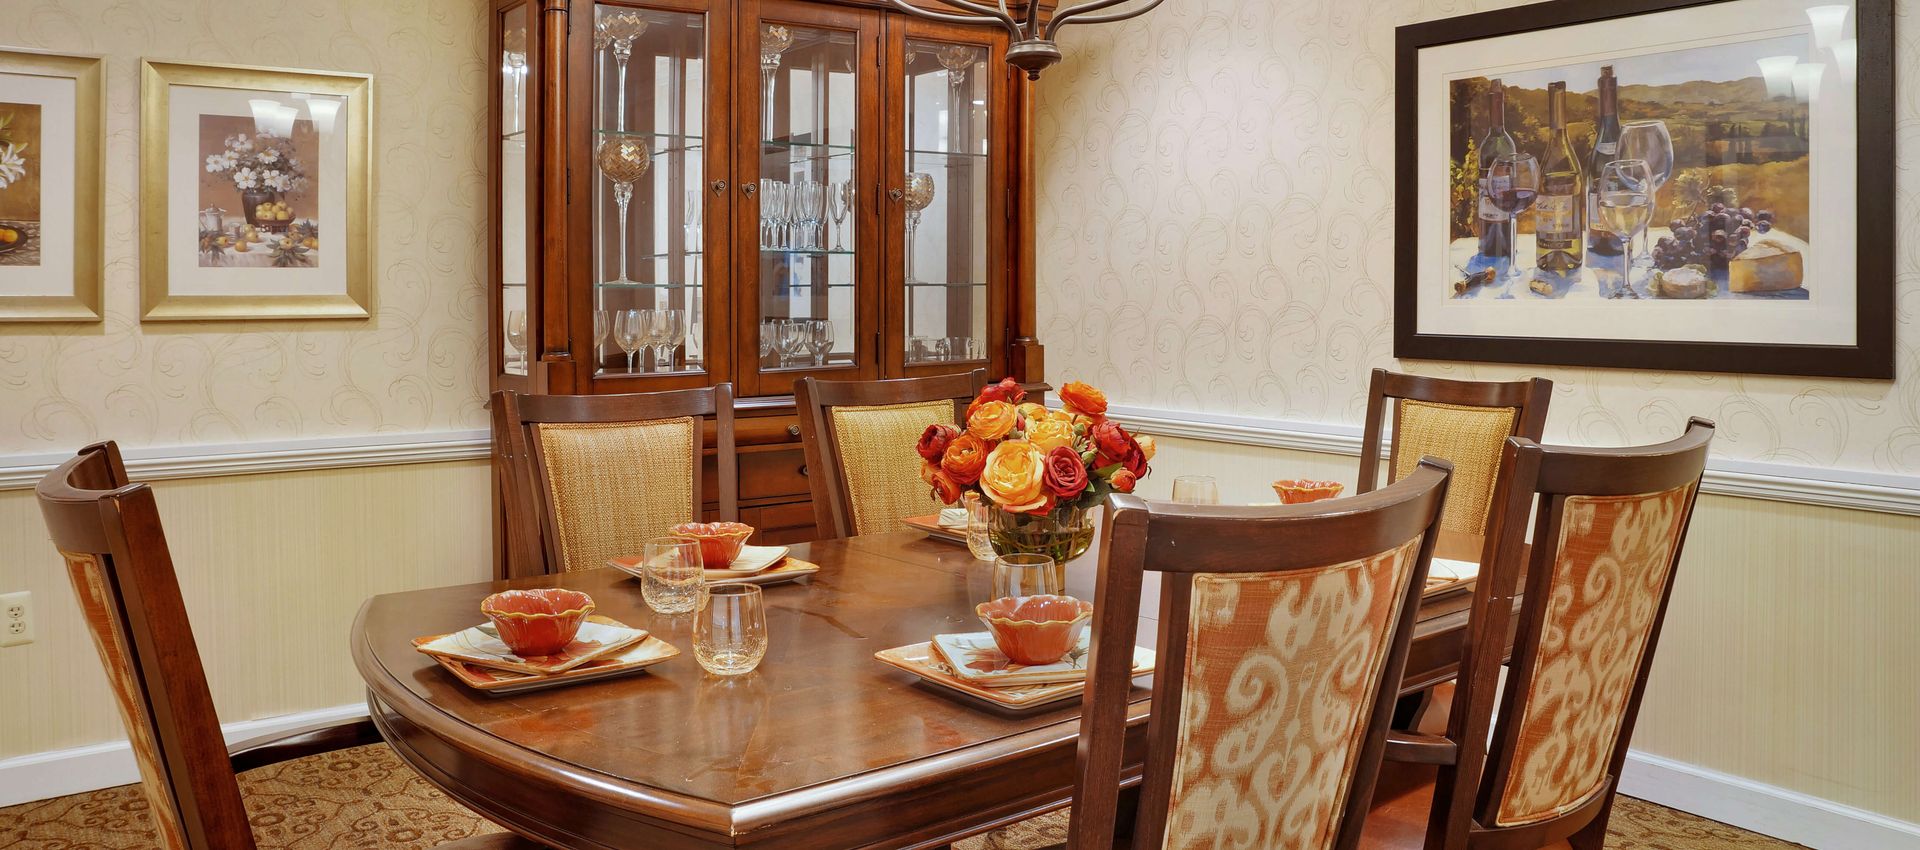 Sunrise of Rochester | Private Dining Room